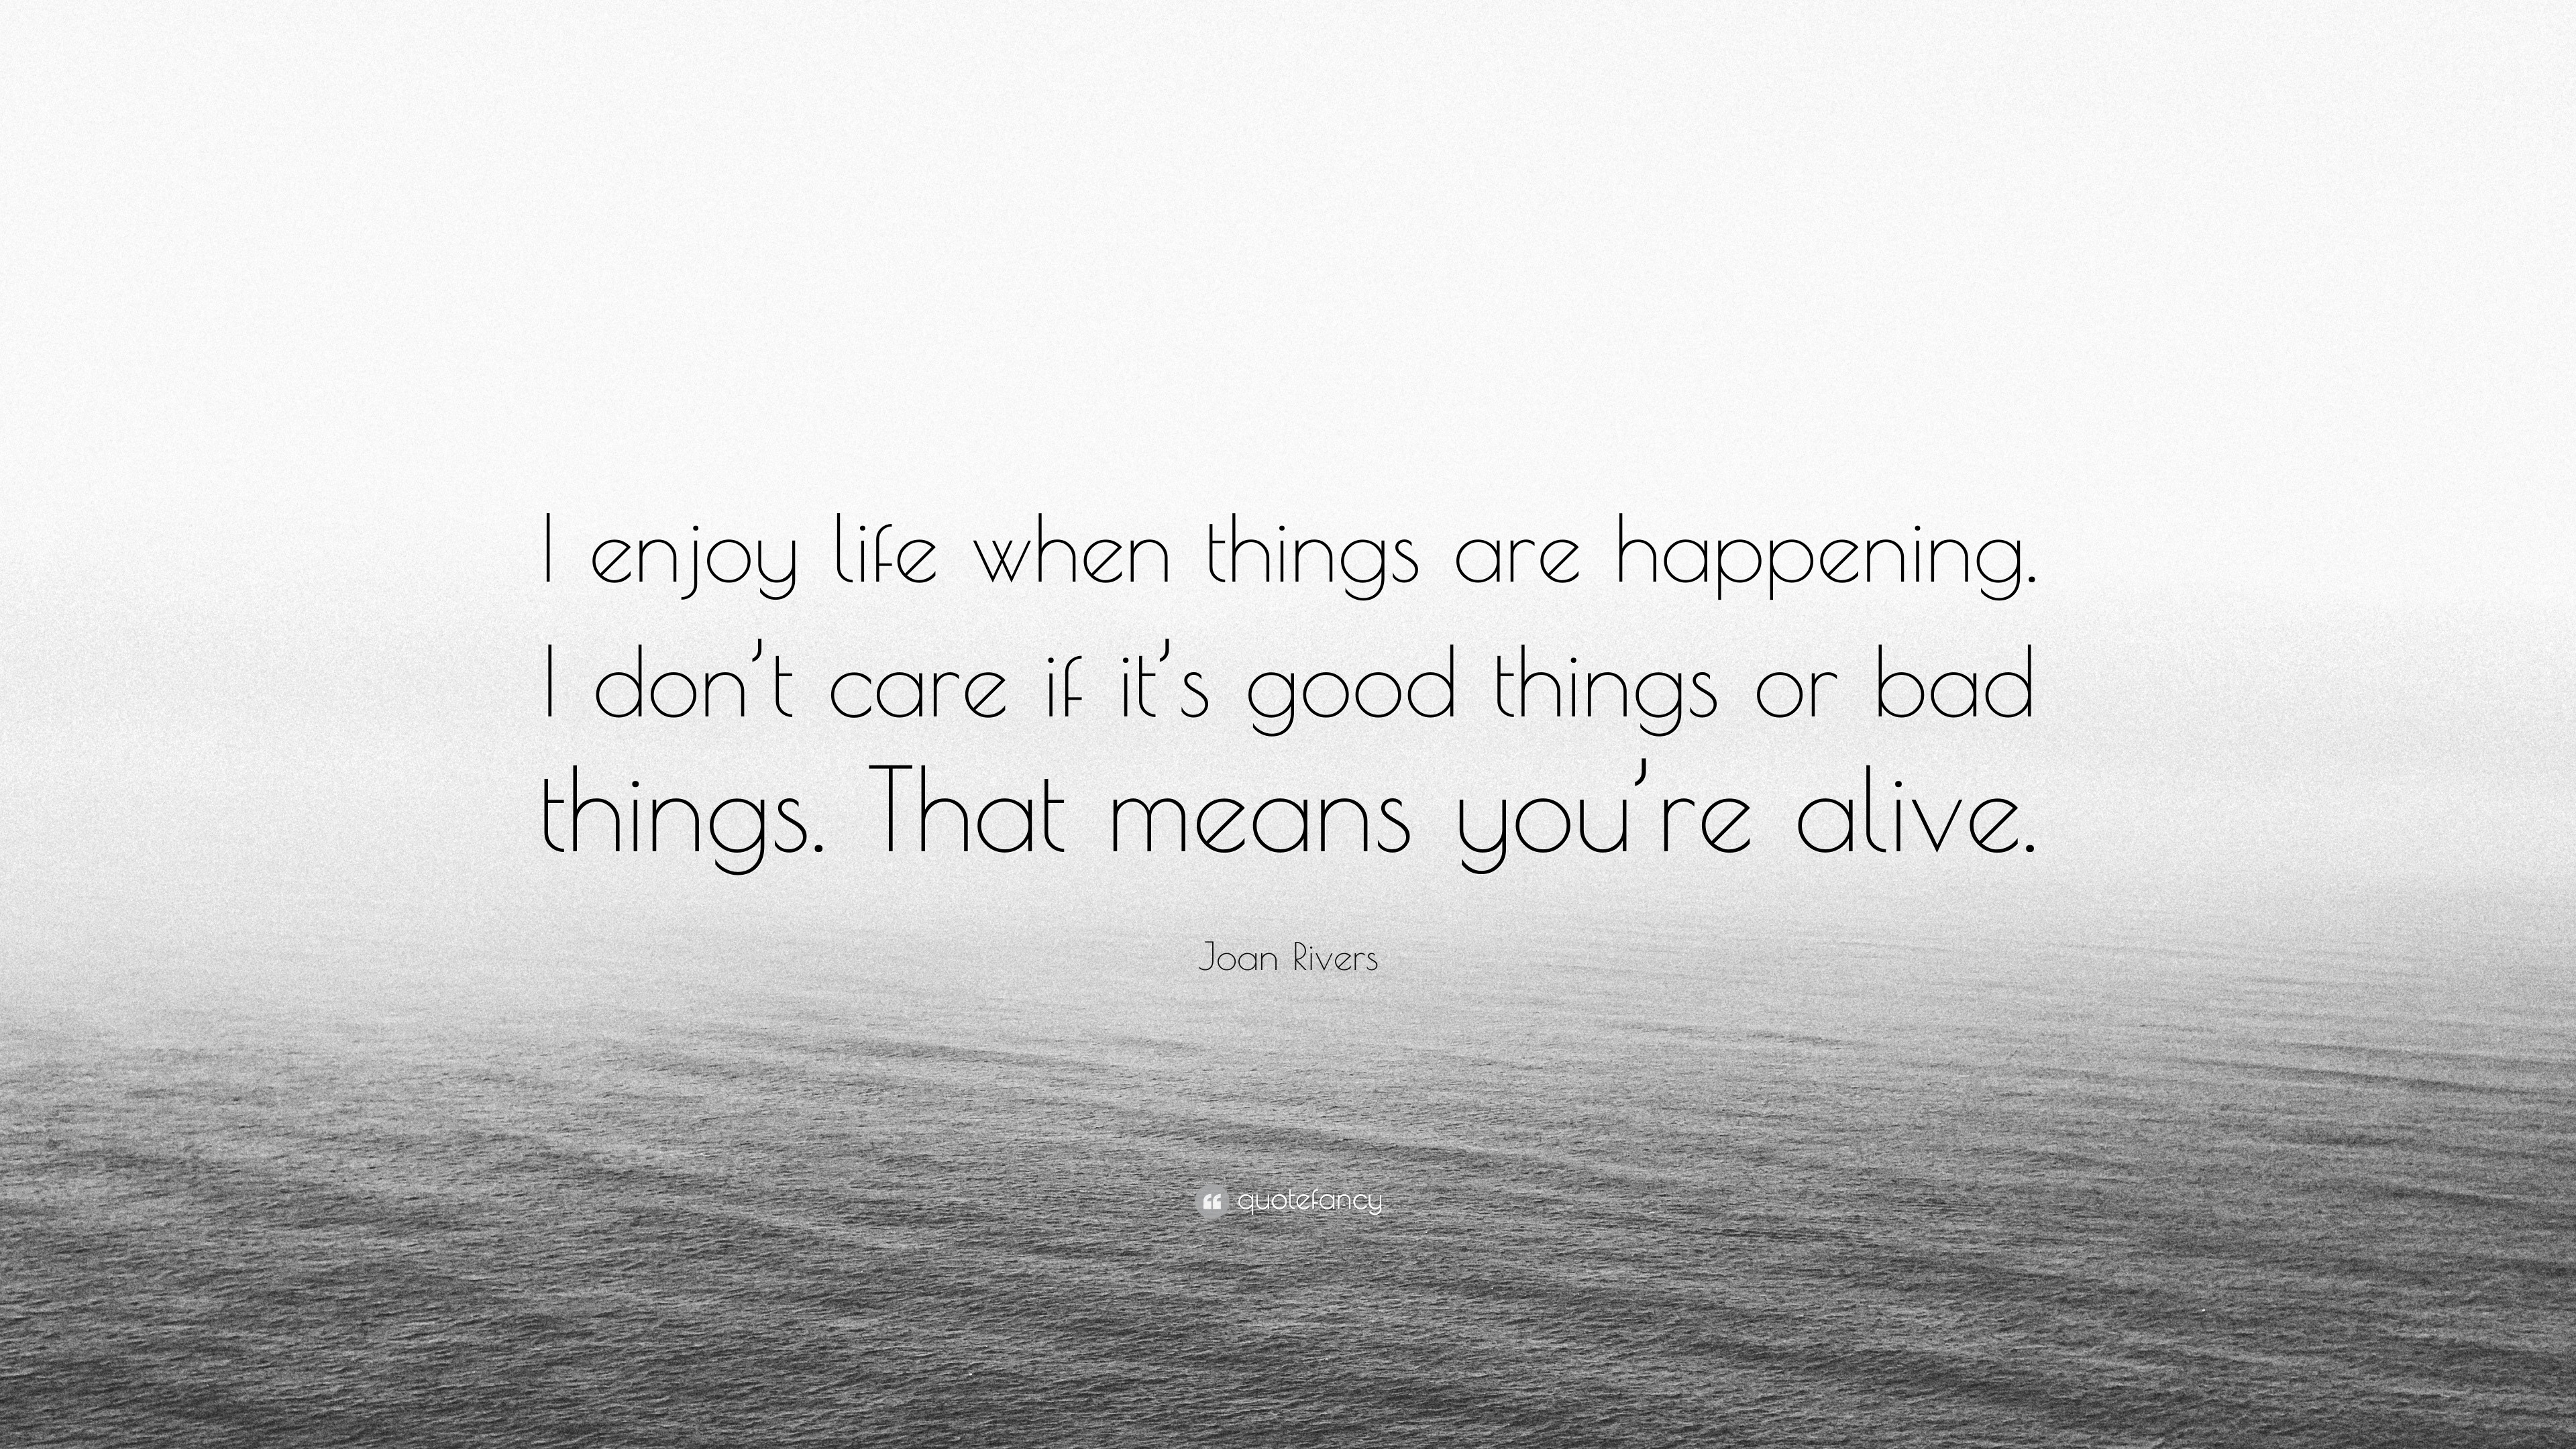 Joan Rivers Quote “I enjoy life when things are happening I don